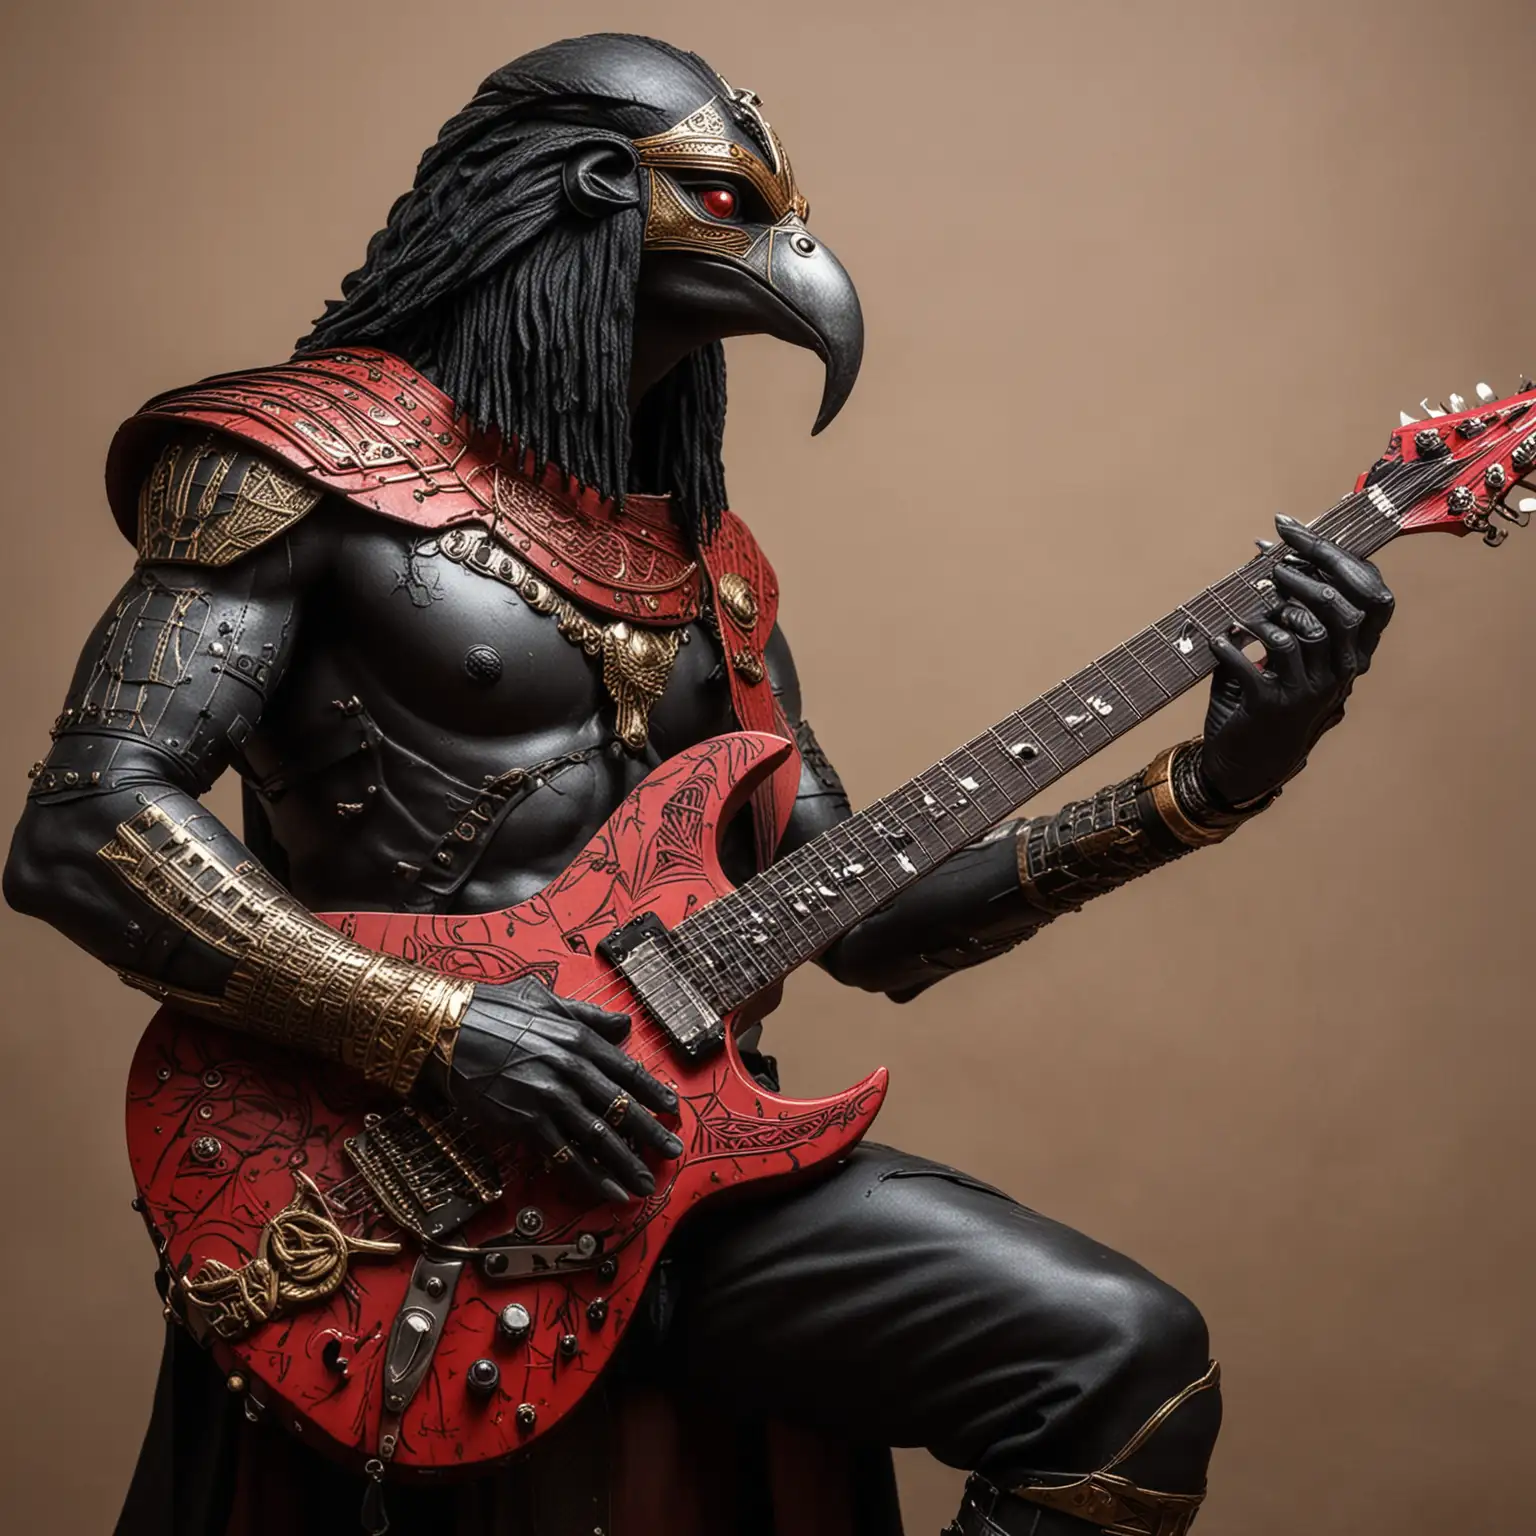 Horus Playing Metal on Black and Red Guitar